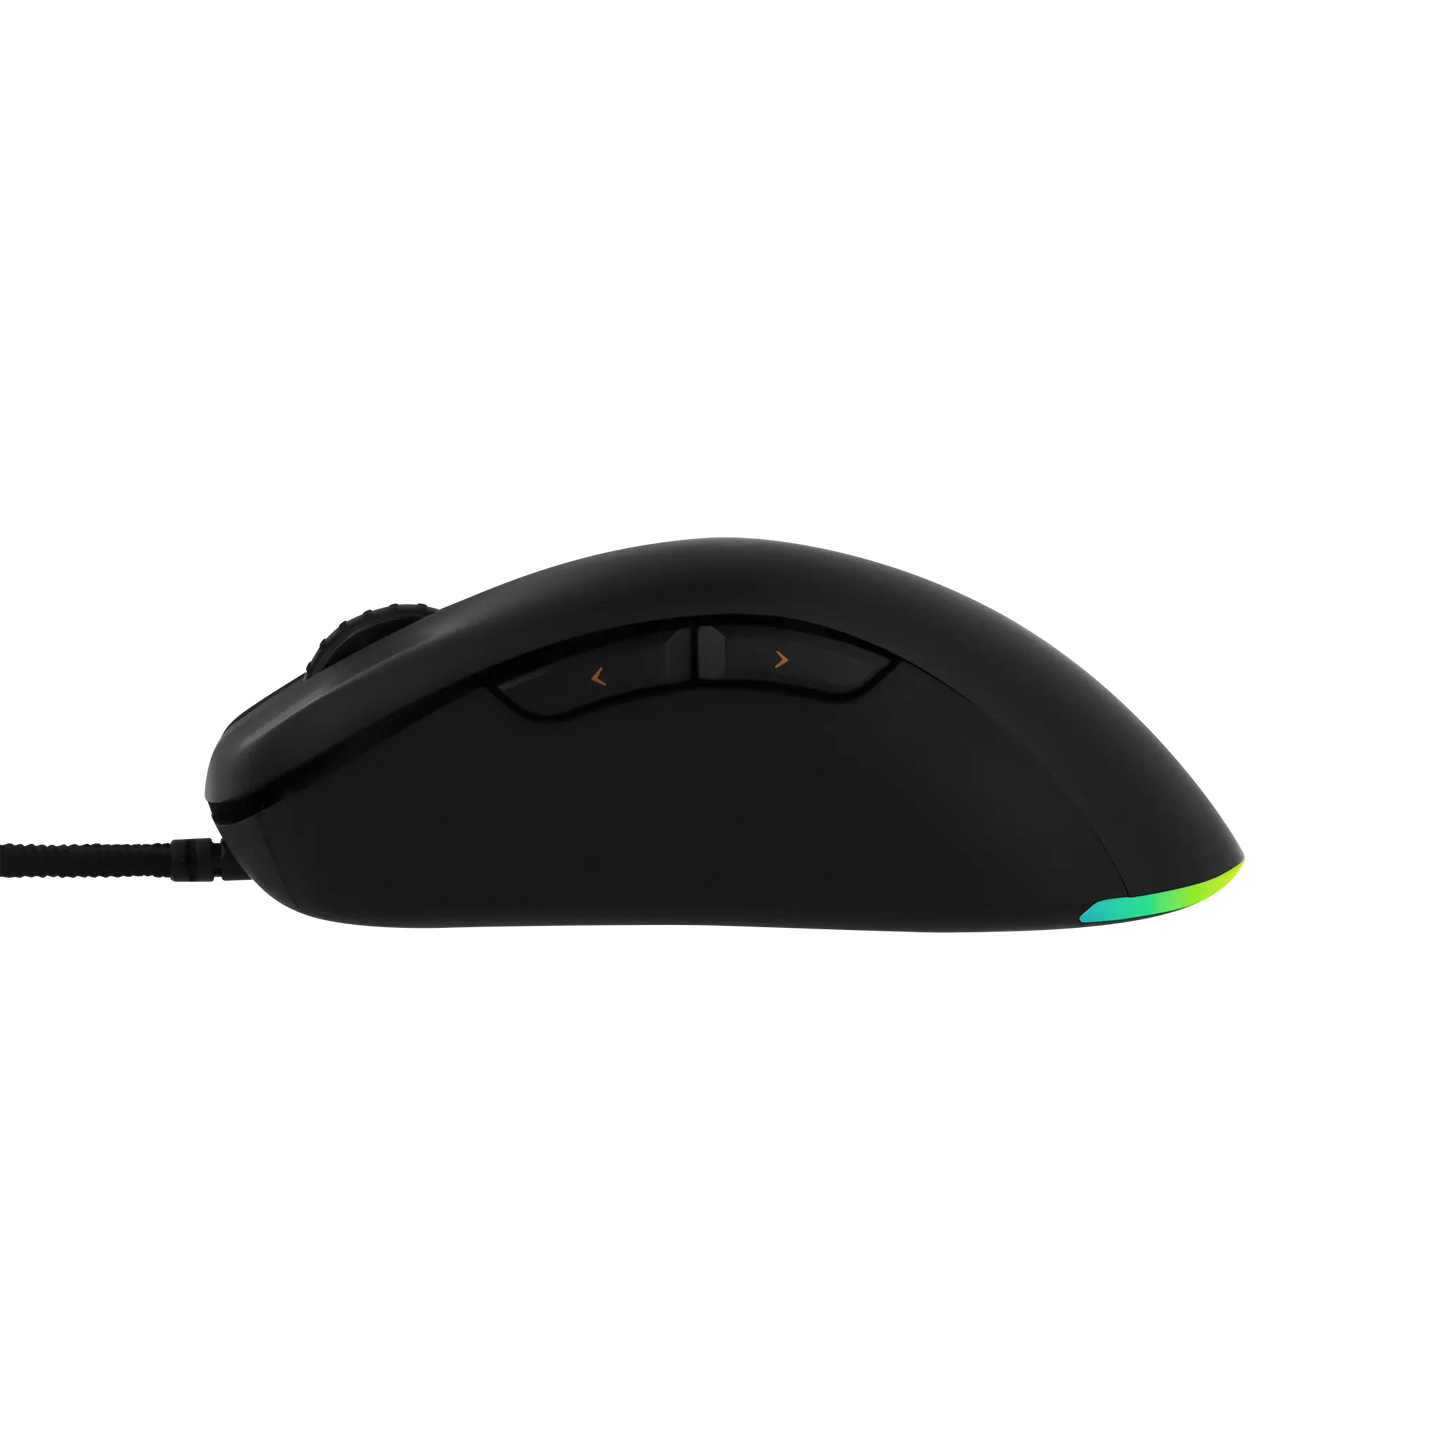 OCPC Gaming - MR44 Gaming Mouse